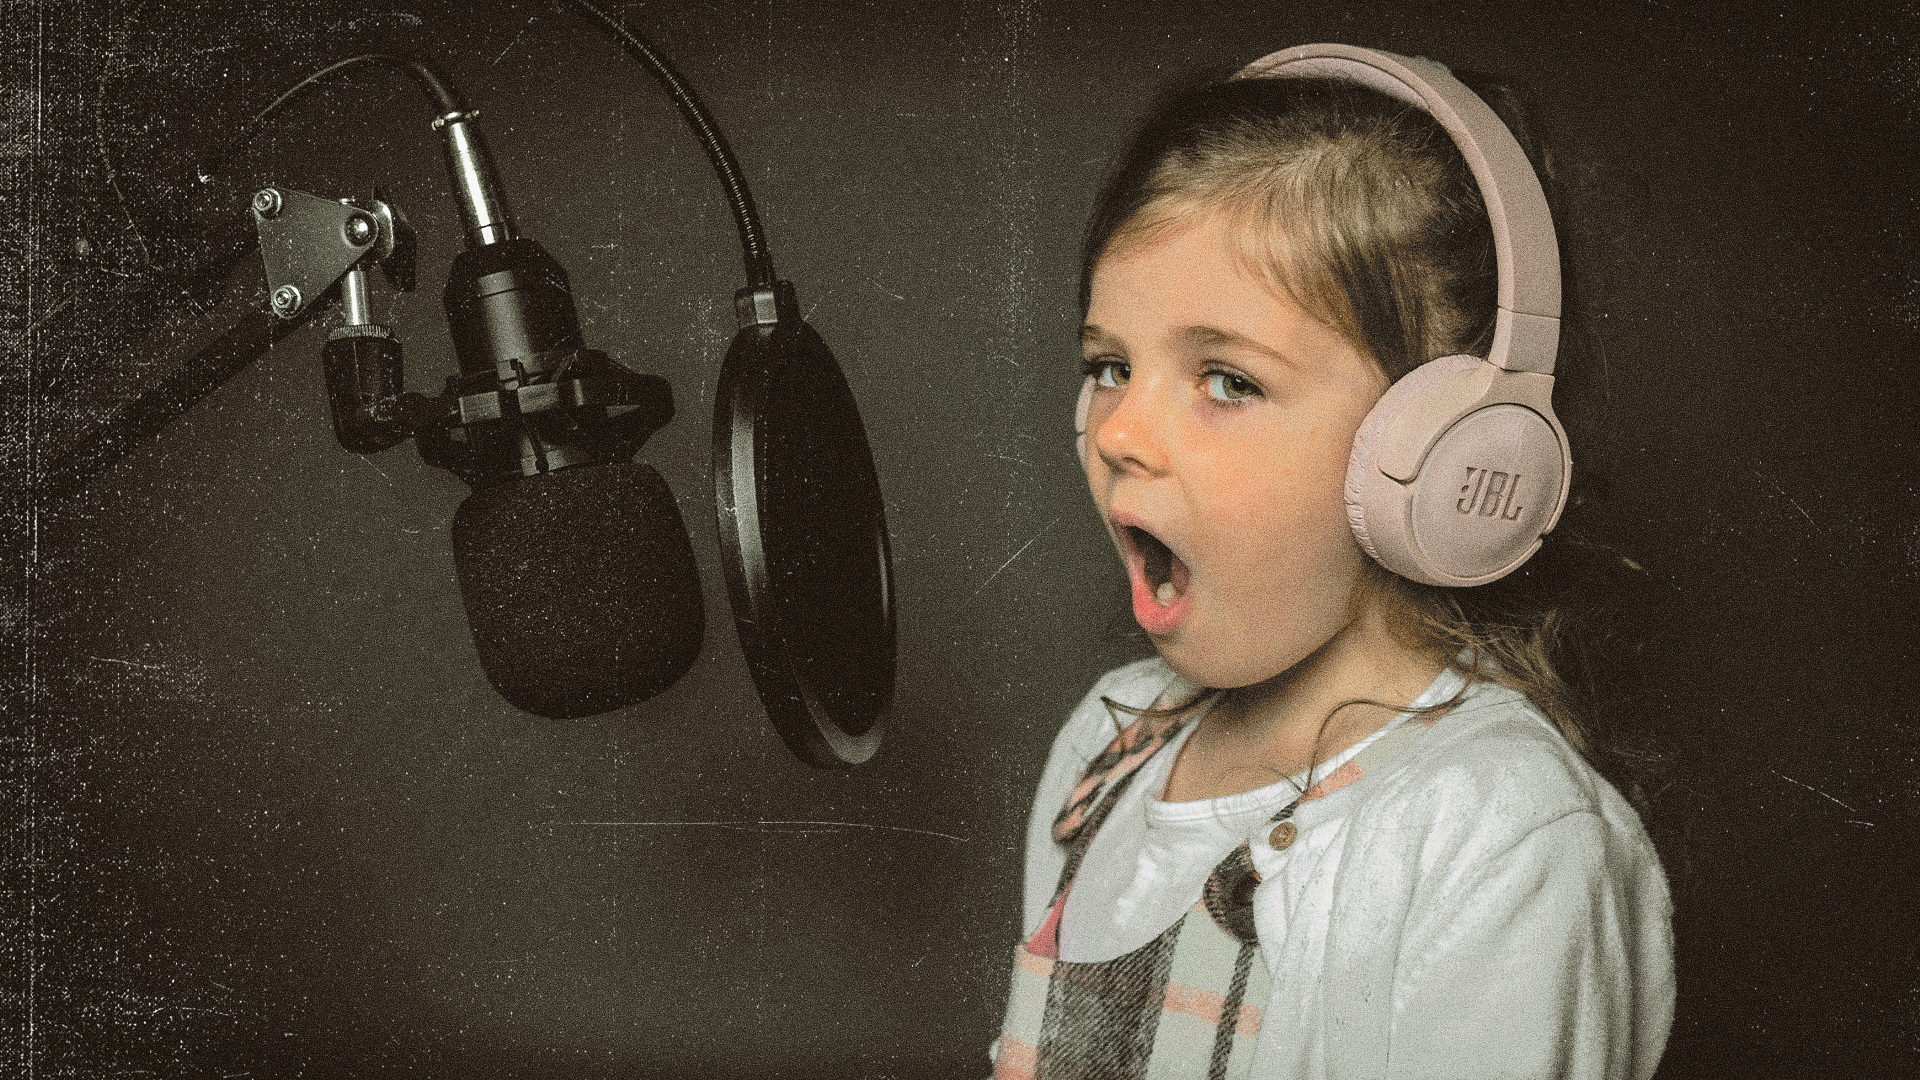 Podcaster’s Child Already Riffing at a 4th Grade Level